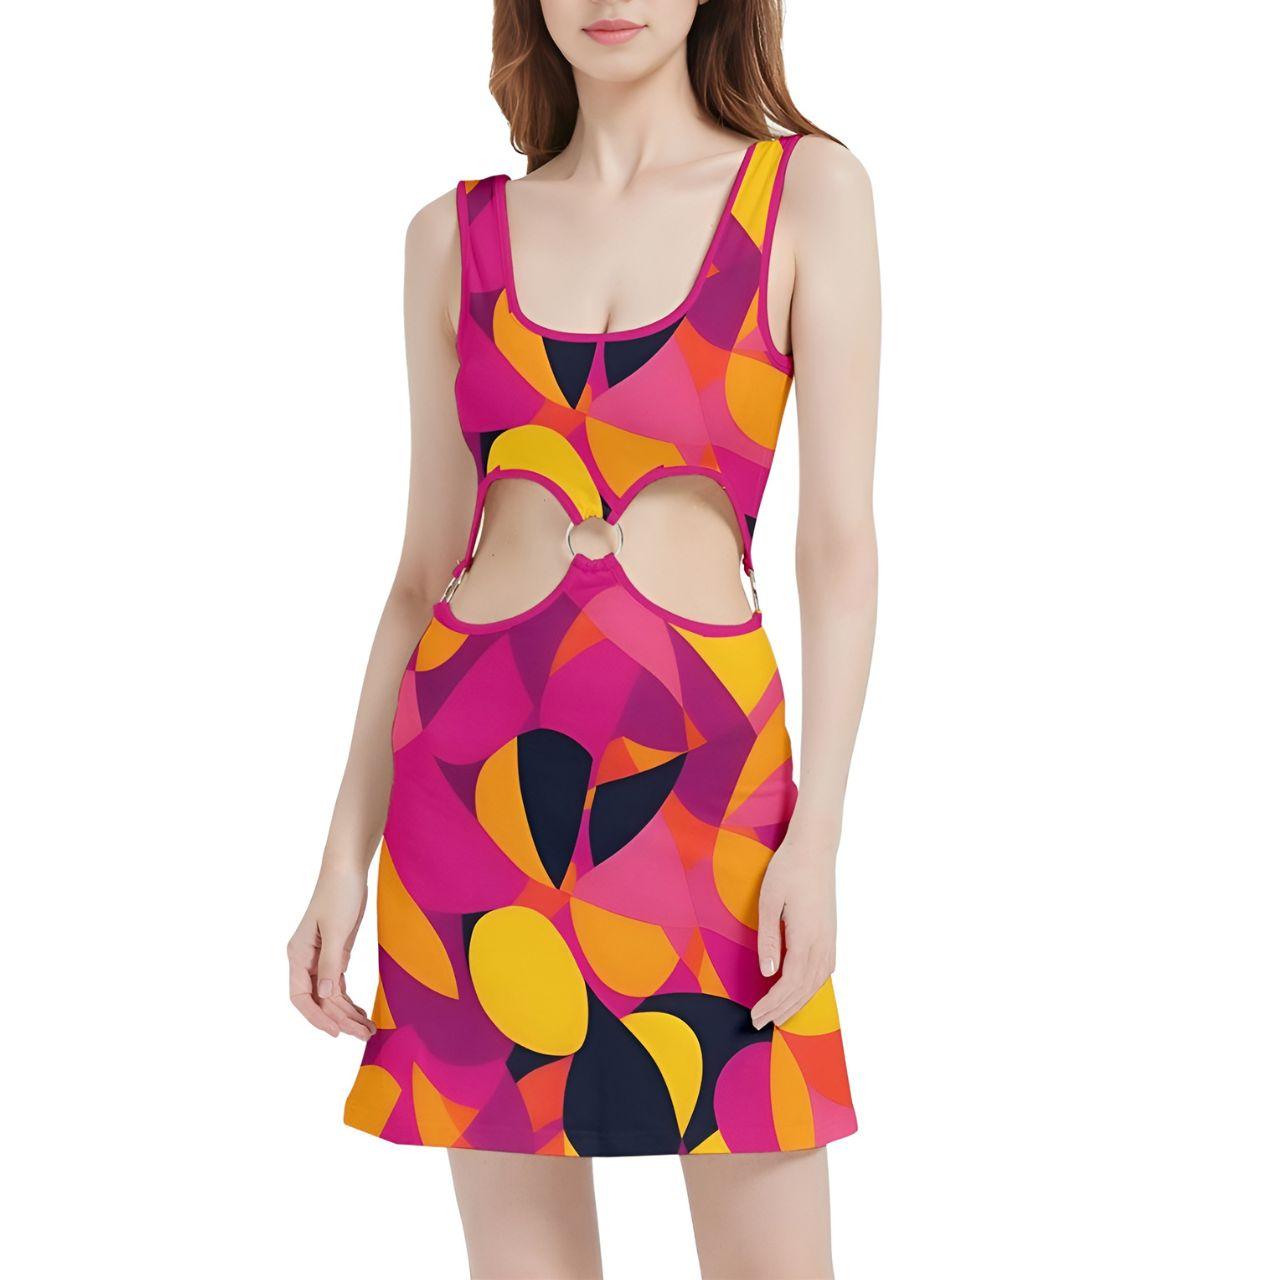 Airline Series Velour Mid Cutout Mini Dress - Mod Abstract Geometric Pink Orange Yellow Retro Funky Bold Vibrant Clubwear Evening Scoop Neck  Psychedelic 70's pop art